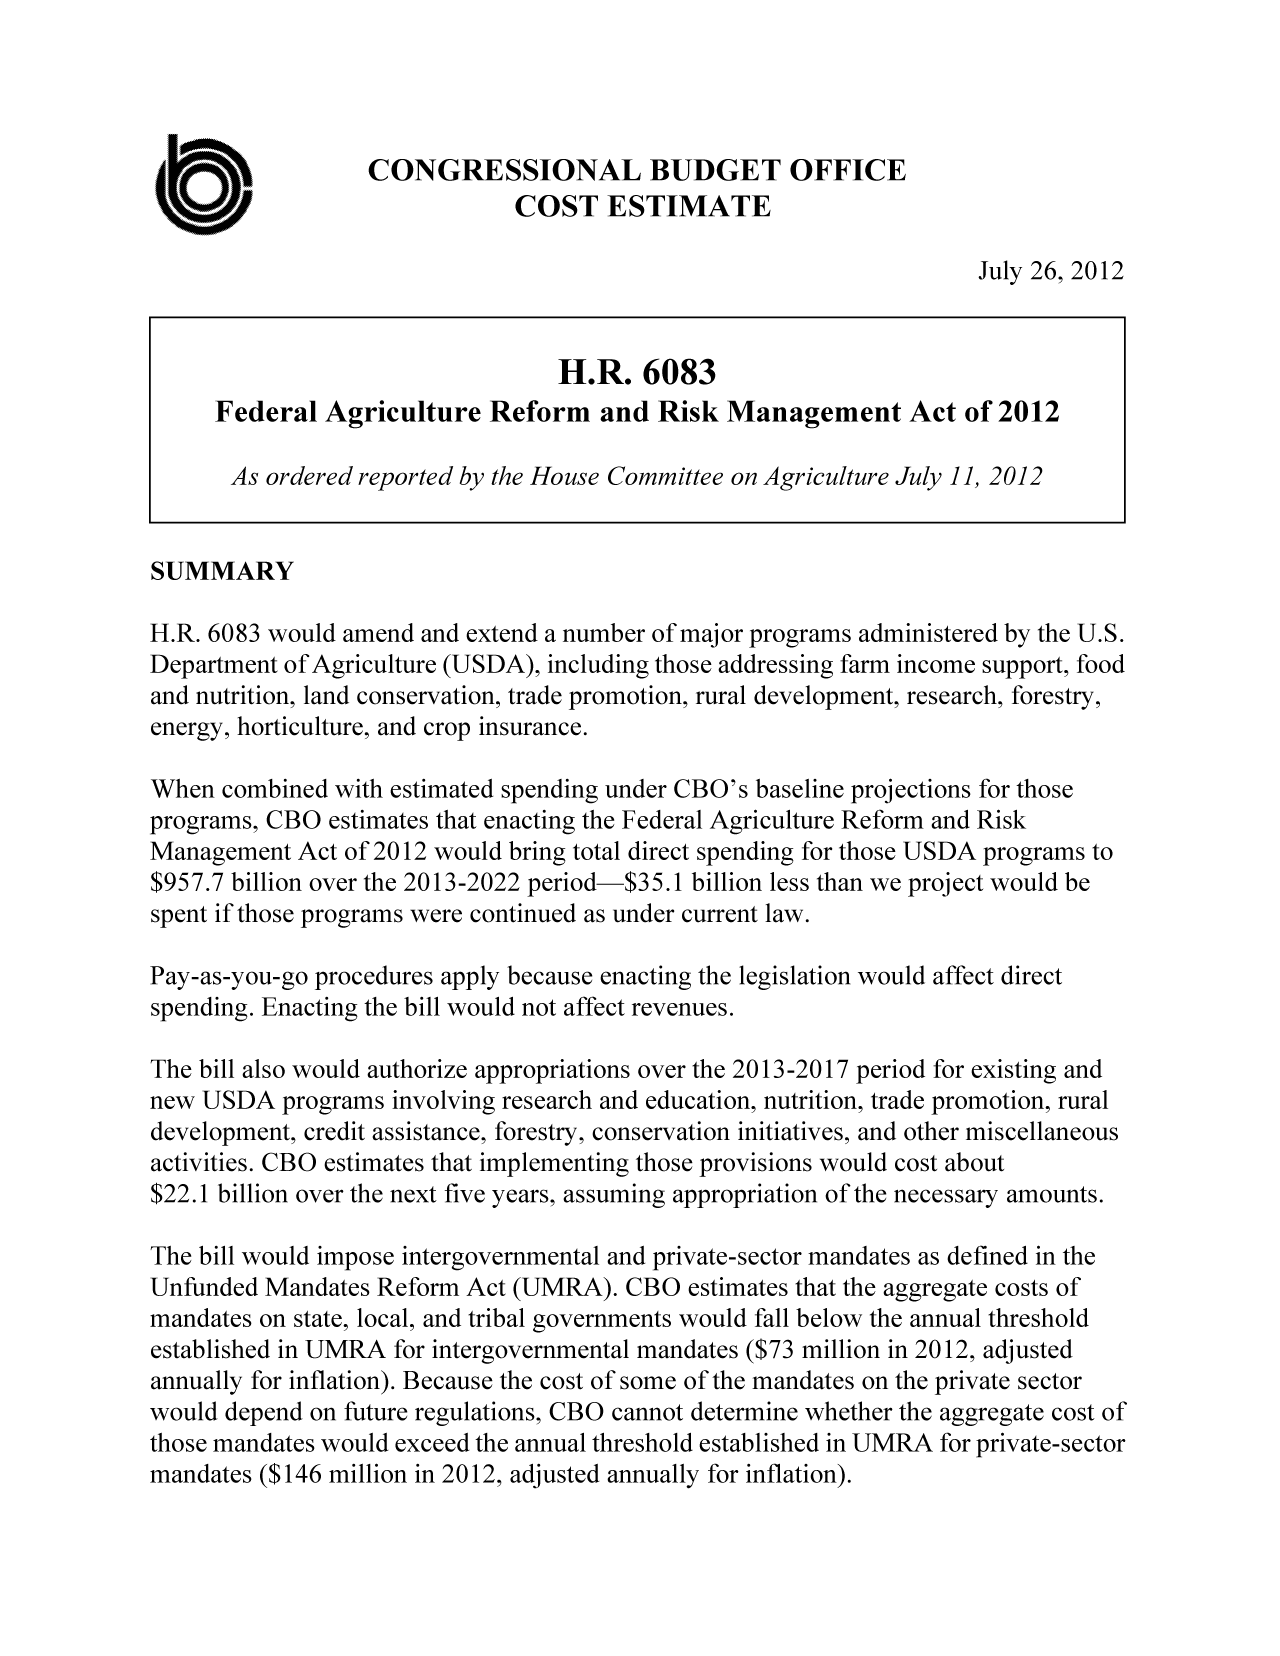 handle is hein.congrec/cbo10823 and id is 1 raw text is: CONGRESSIONAL BUDGET OFFICE
COST ESTIMATE
July 26, 2012
H.R. 6083
Federal Agriculture Reform and Risk Management Act of 2012
As ordered reported by the House Committee on Agriculture July]]1, 2012
SUMMARY
H.R. 6083 would amend and extend a number of major programs administered by the U.S.
Department of Agriculture (USDA), including those addressing farm income support, food
and nutrition, land conservation, trade promotion, rural development, research, forestry,
energy, horticulture, and crop insurance.
When combined with estimated spending under CBO's baseline projections for those
programs, CBO estimates that enacting the Federal Agriculture Reform and Risk
Management Act of 2012 would bring total direct spending for those USDA programs to
$957.7 billion over the 2013-2022 period-$35.1 billion less than we project would be
spent if those programs were continued as under current law.
Pay-as-you-go procedures apply because enacting the legislation would affect direct
spending. Enacting the bill would not affect revenues.
The bill also would authorize appropriations over the 2013-2017 period for existing and
new USDA programs involving research and education, nutrition, trade promotion, rural
development, credit assistance, forestry, conservation initiatives, and other miscellaneous
activities. CBO estimates that implementing those provisions would cost about
$22.1 billion over the next five years, assuming appropriation of the necessary amounts.
The bill would impose intergovernmental and private-sector mandates as defined in the
Unfunded Mandates Reform Act (UMRA). CBO estimates that the aggregate costs of
mandates on state, local, and tribal governments would fall below the annual threshold
established in UMRA for intergovernmental mandates ($73 million in 2012, adjusted
annually for inflation). Because the cost of some of the mandates on the private sector
would depend on future regulations, CBO cannot determine whether the aggregate cost of
those mandates would exceed the annual threshold established in UMRA for private-sector
mandates ($146 million in 2012, adjusted annually for inflation).


